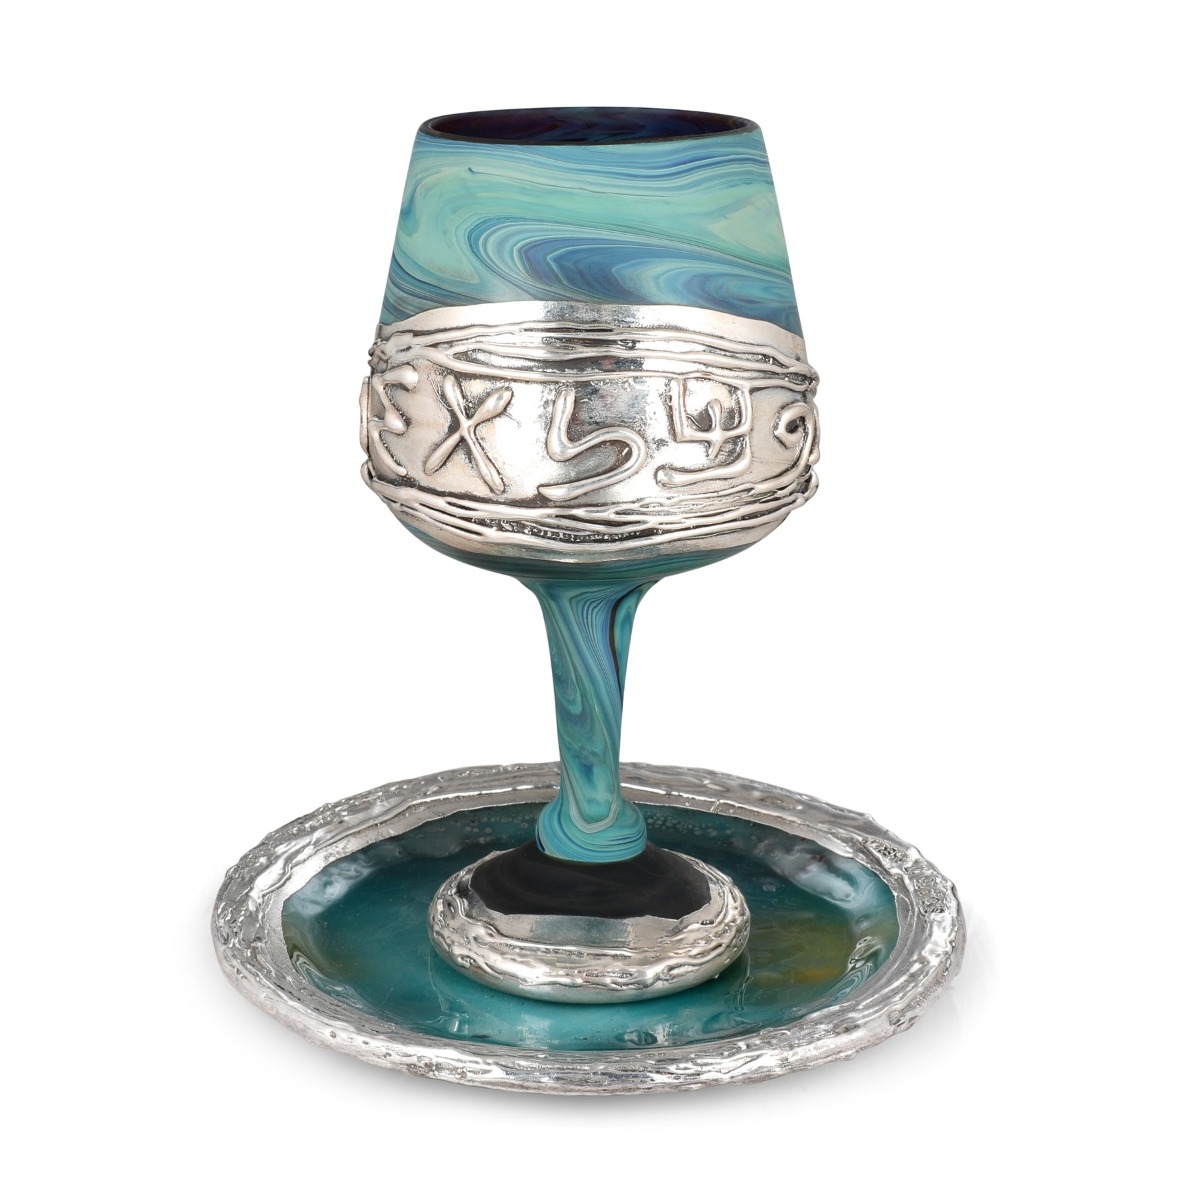 "Jerusalem" Ceramic and Sterling Silver-Plated Kiddush Cup With Ancient Hebrew Design - 3